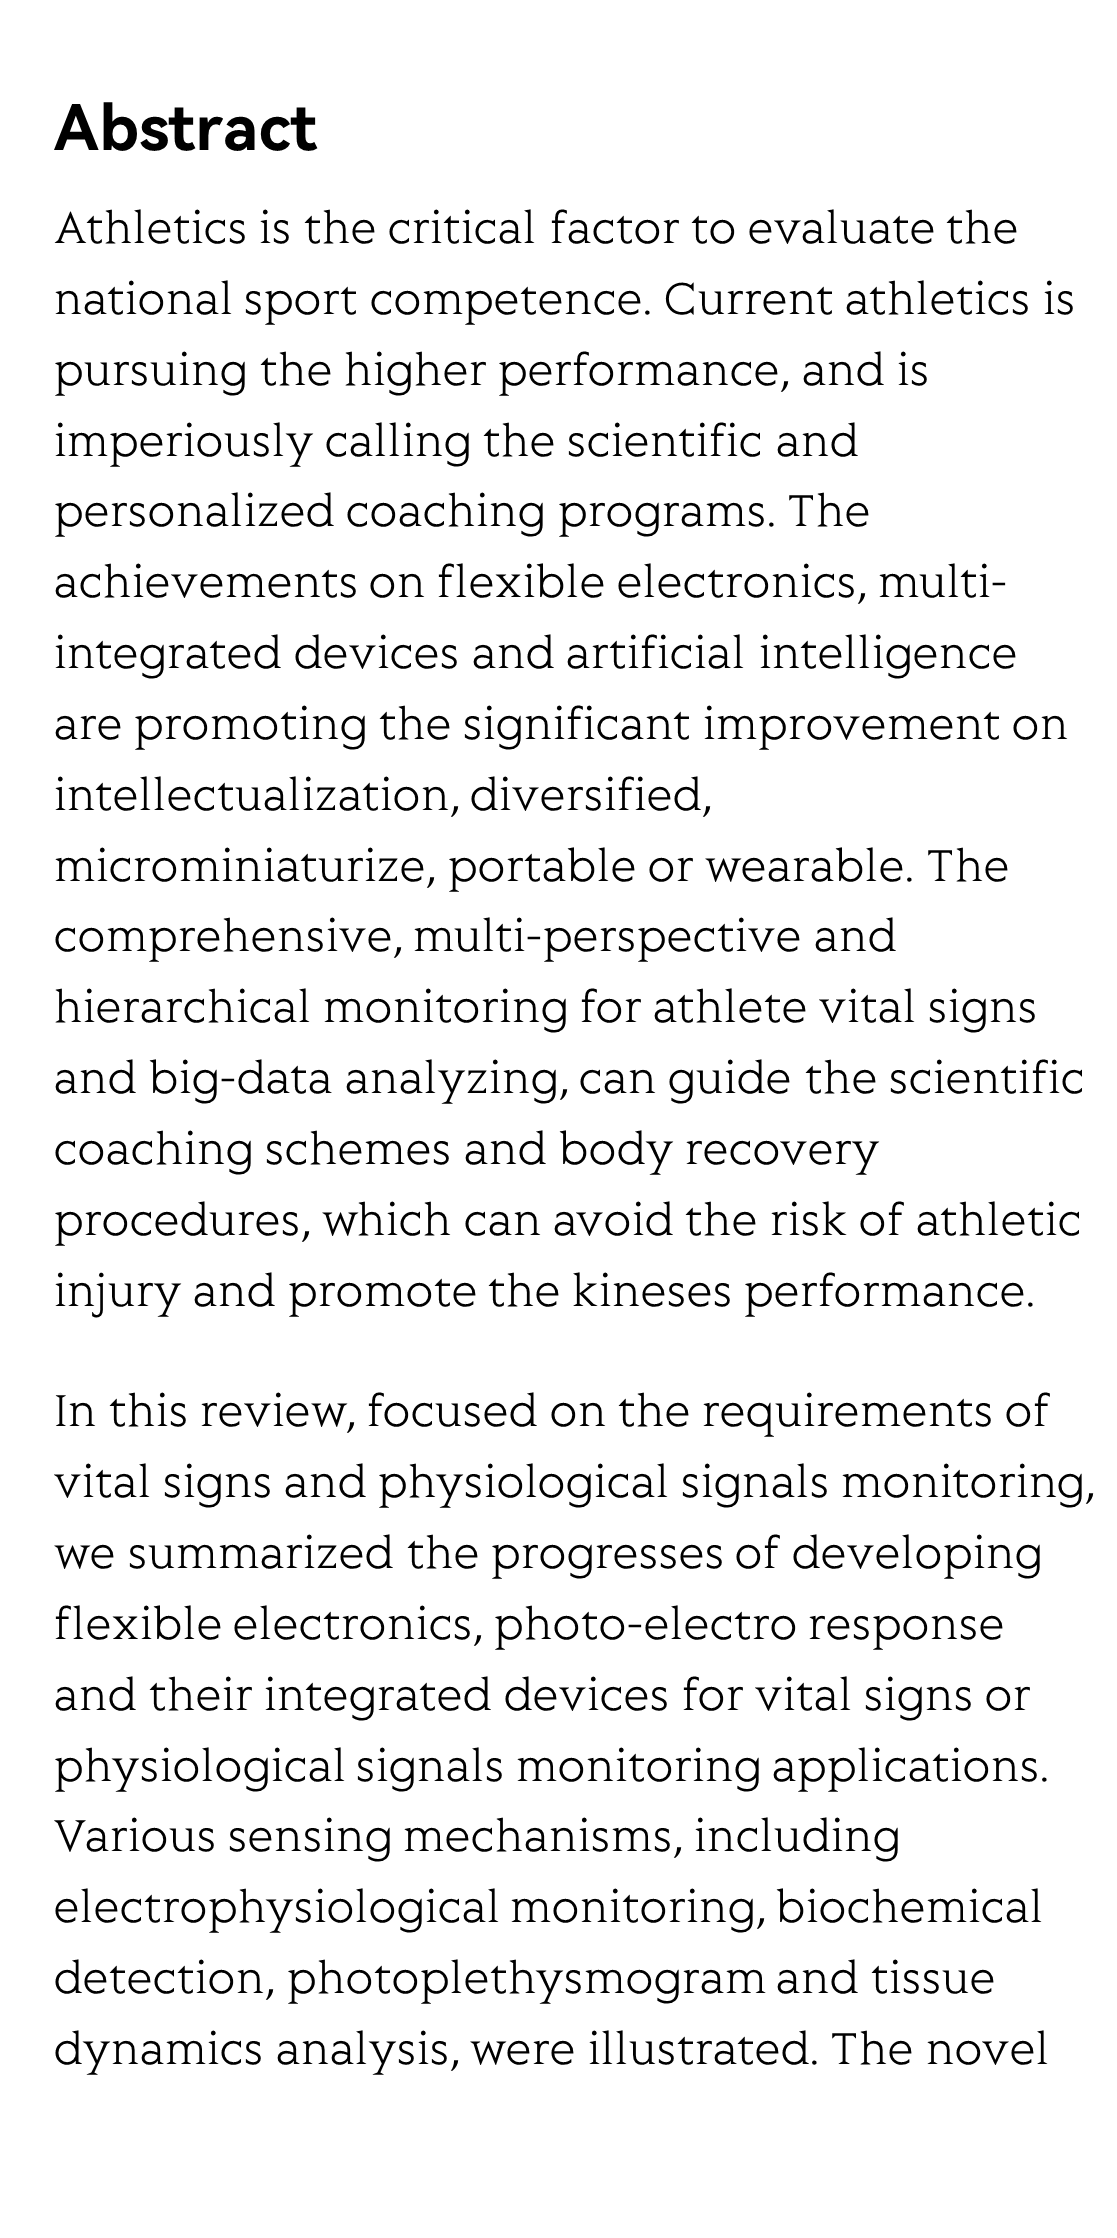 Scientific athletics training: Flexible sensors and wearable devices for kineses monitoring applications_2